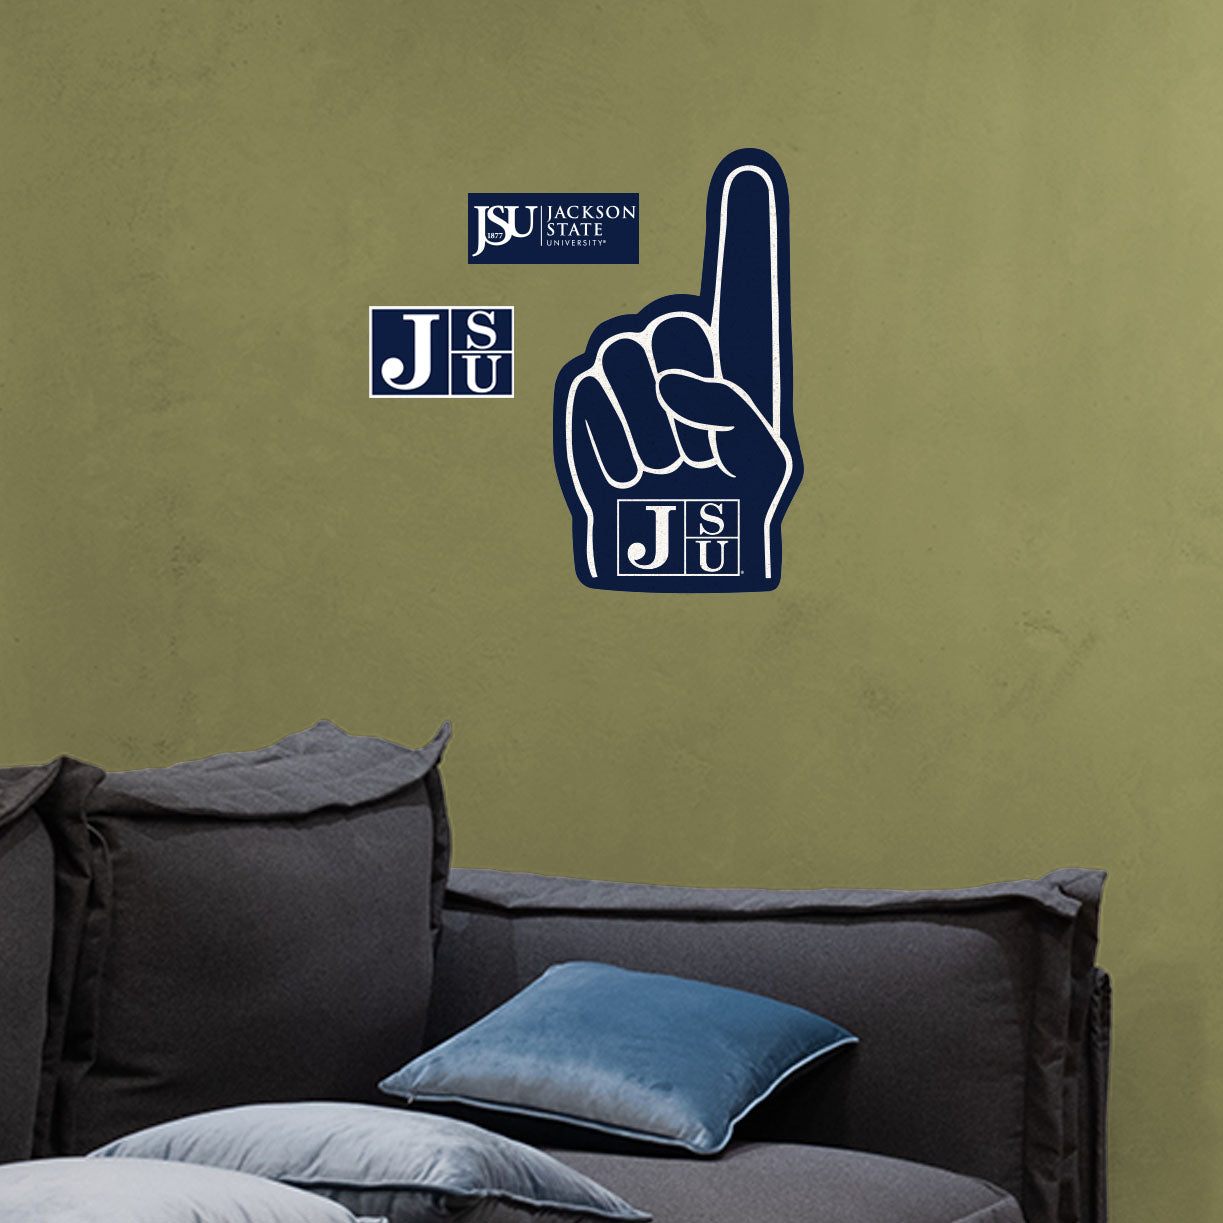 Jackson State Tigers: Foam Finger - Officially Licensed NCAA Removable Adhesive Decal